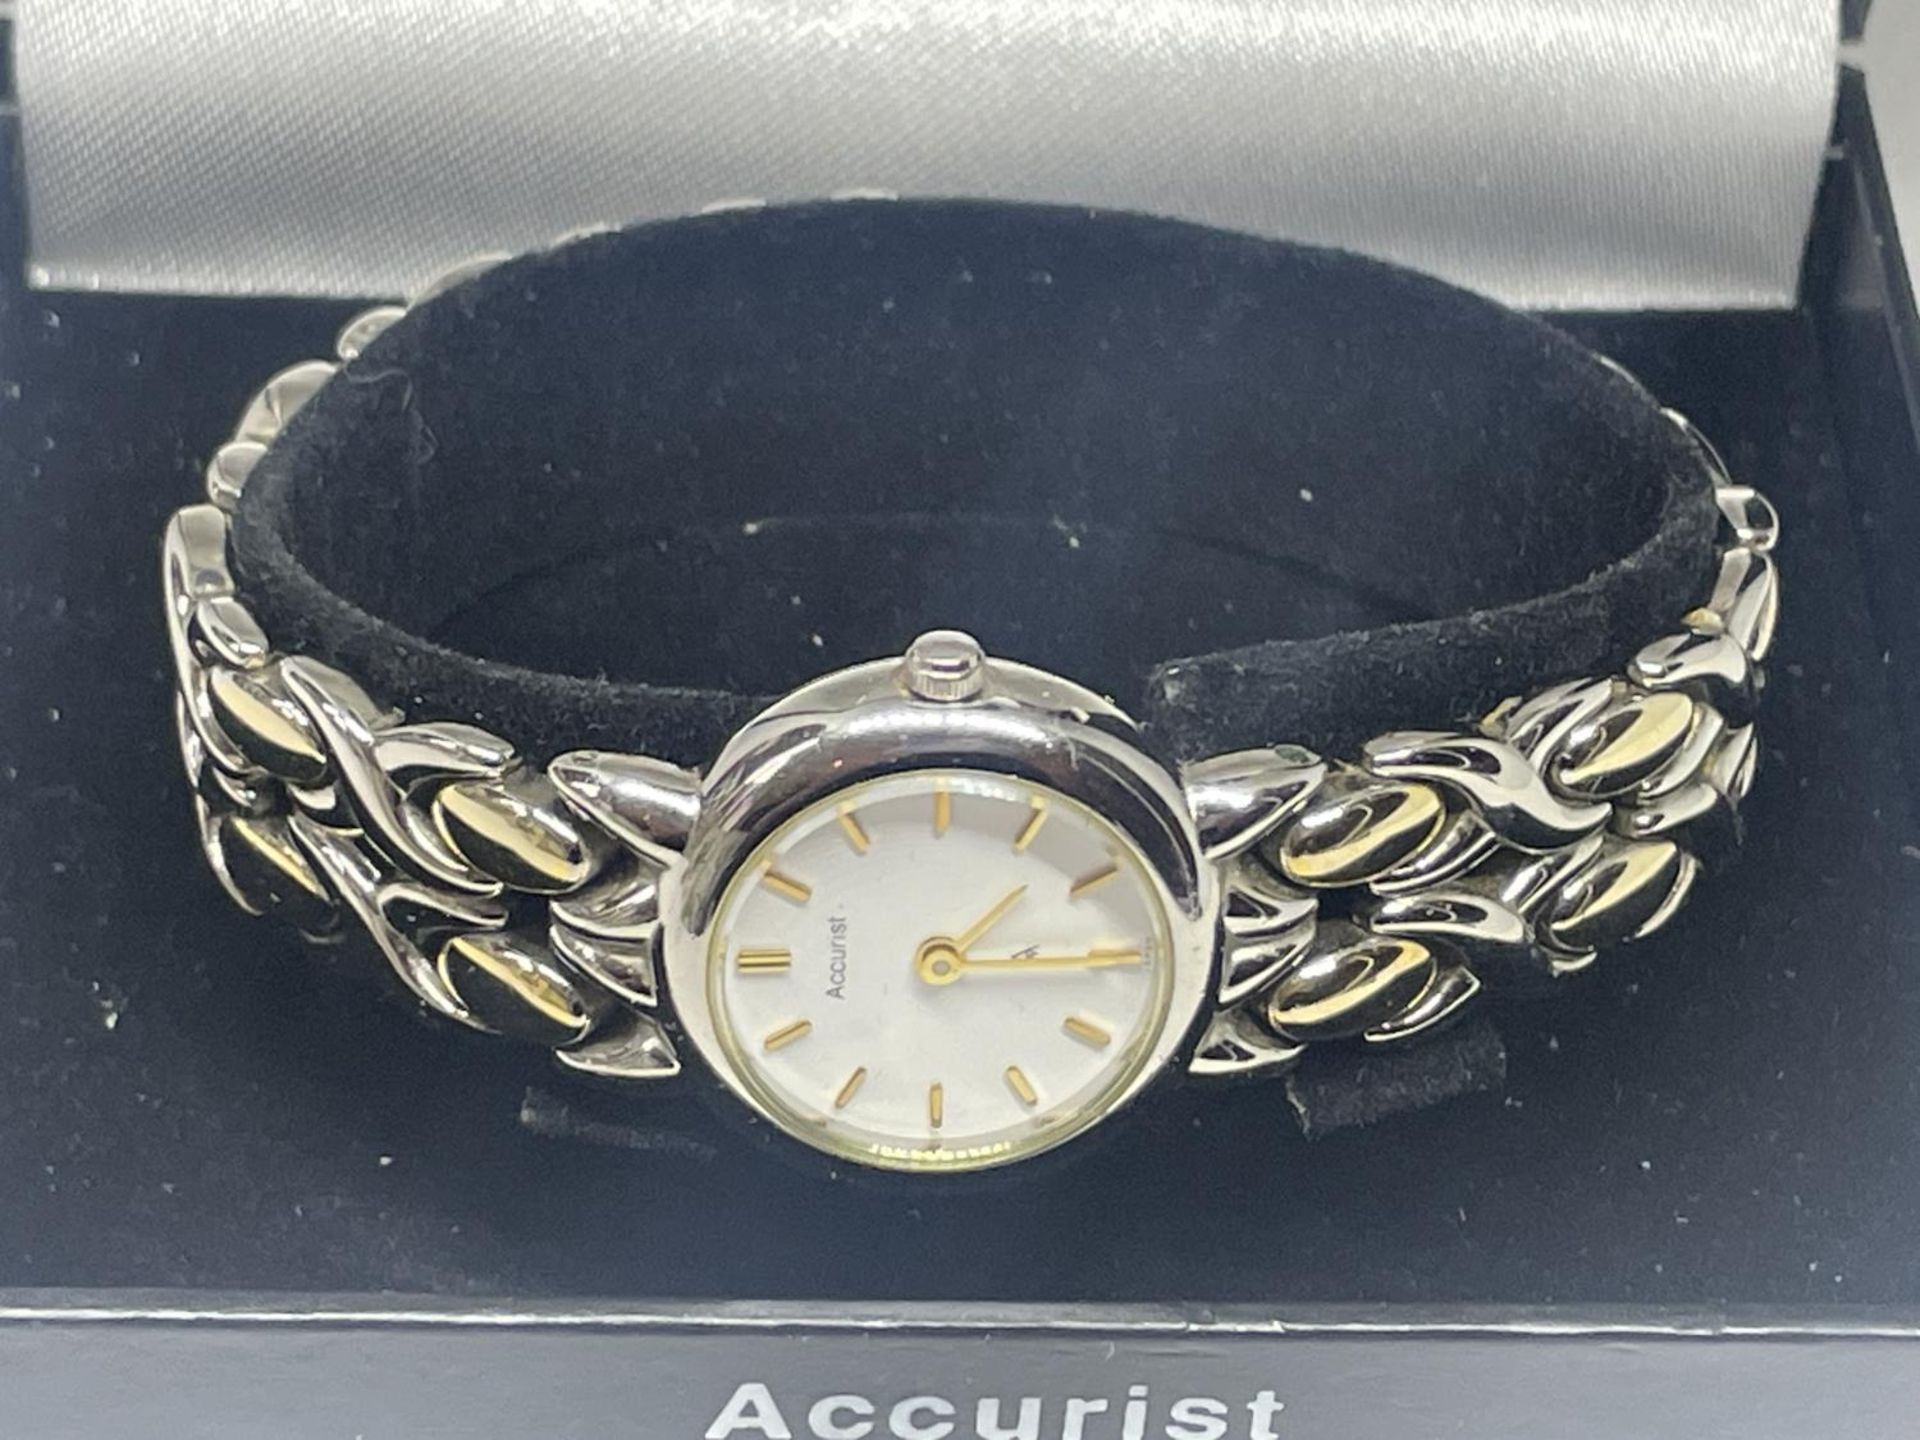 AN ACCURIST WRIST WATCH IN A PRESENTATION BOX - Image 2 of 2